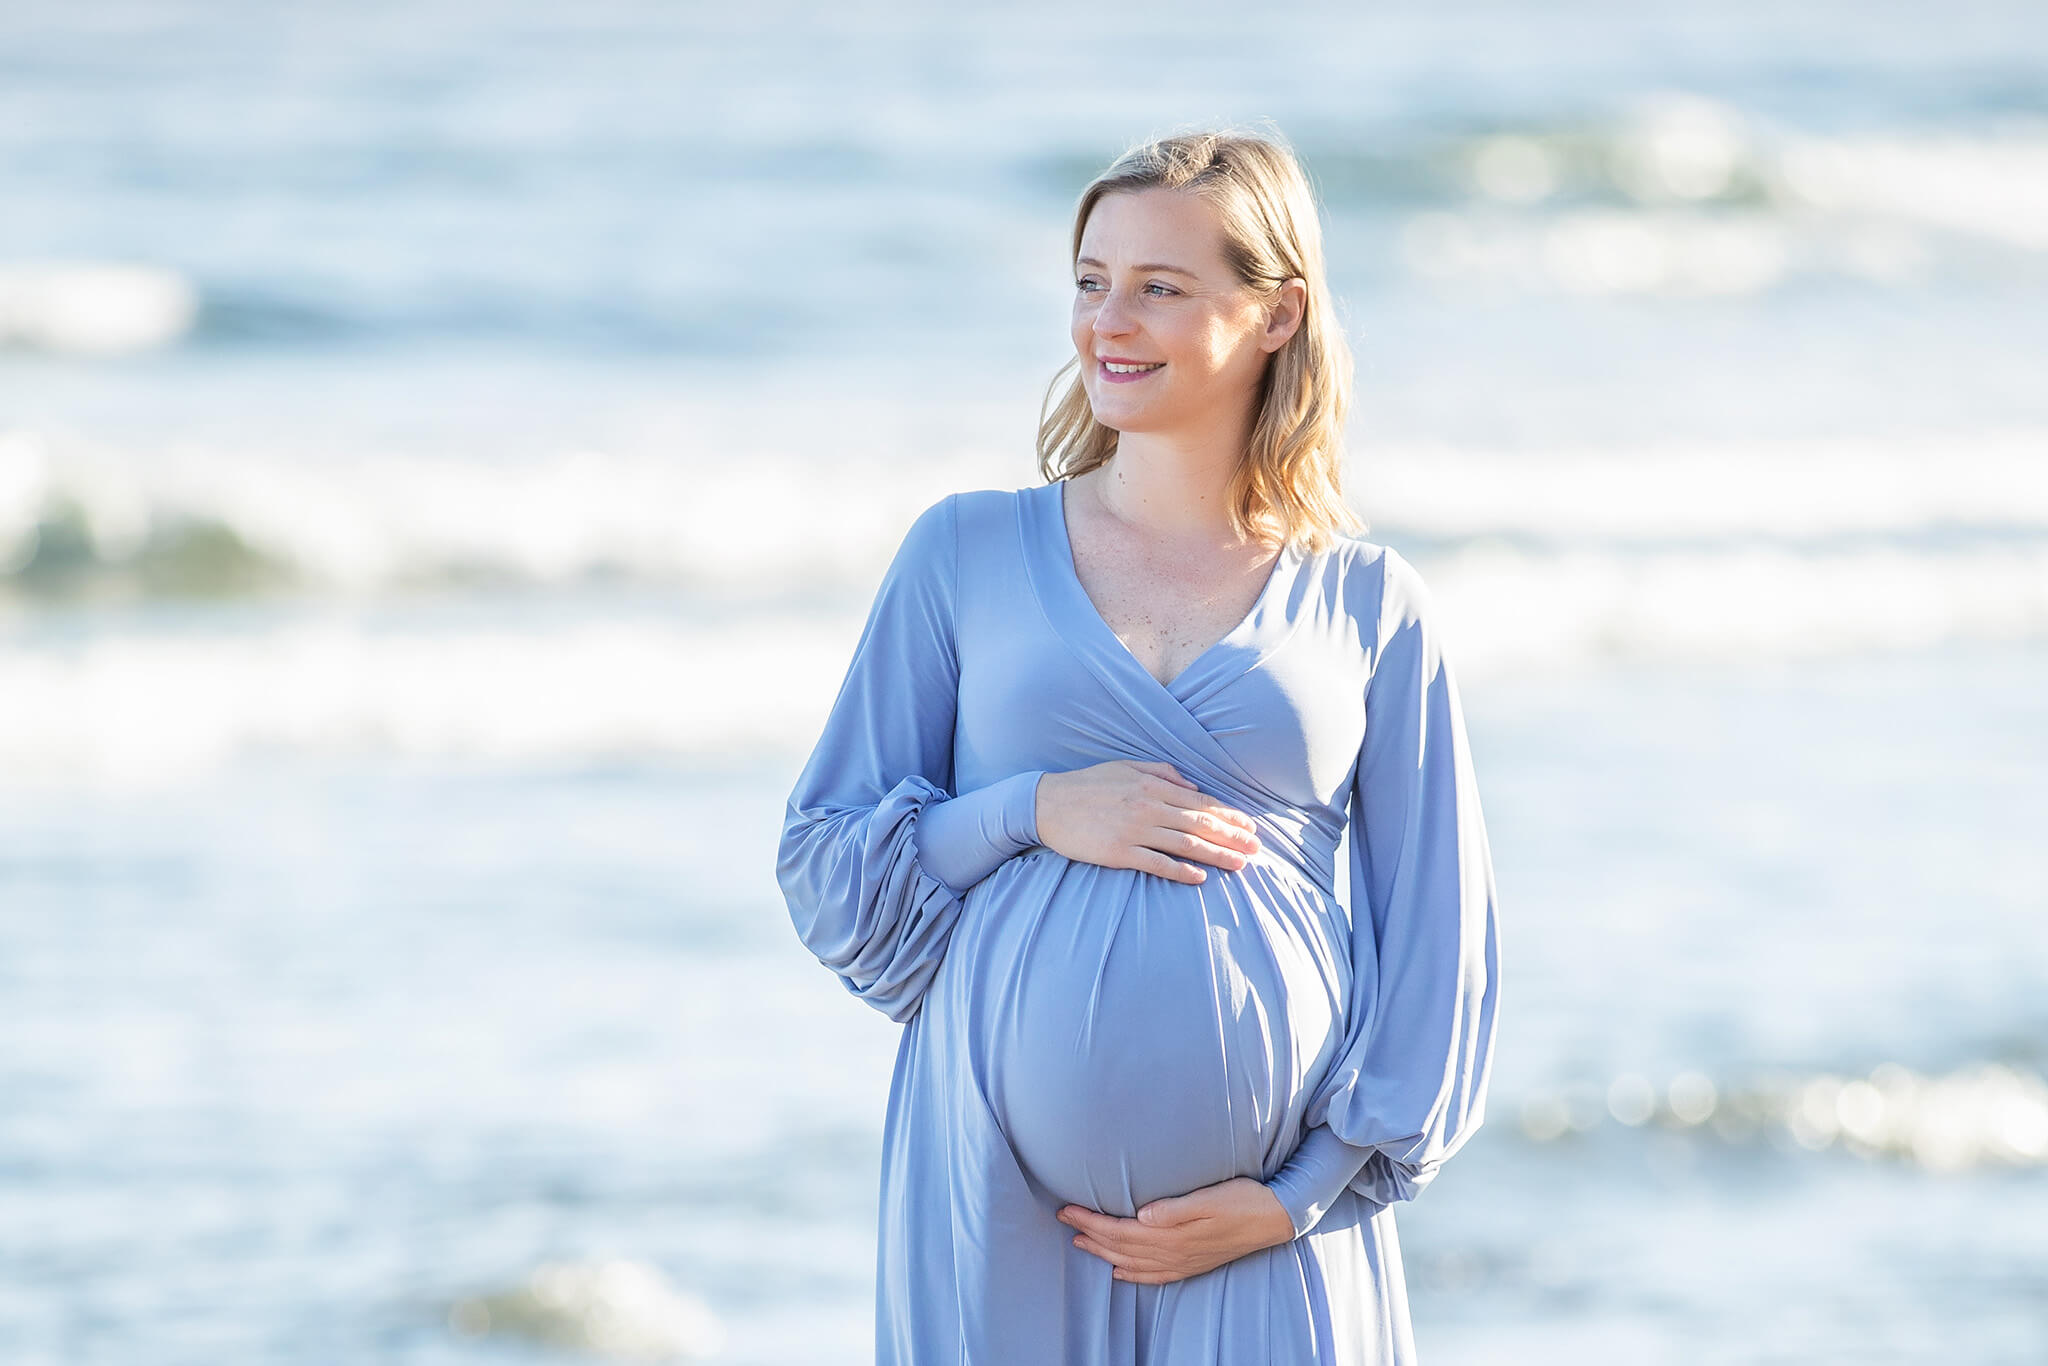 Mom to be wearing a blue dress at beach in Malibu - Birth Center Los Angeles